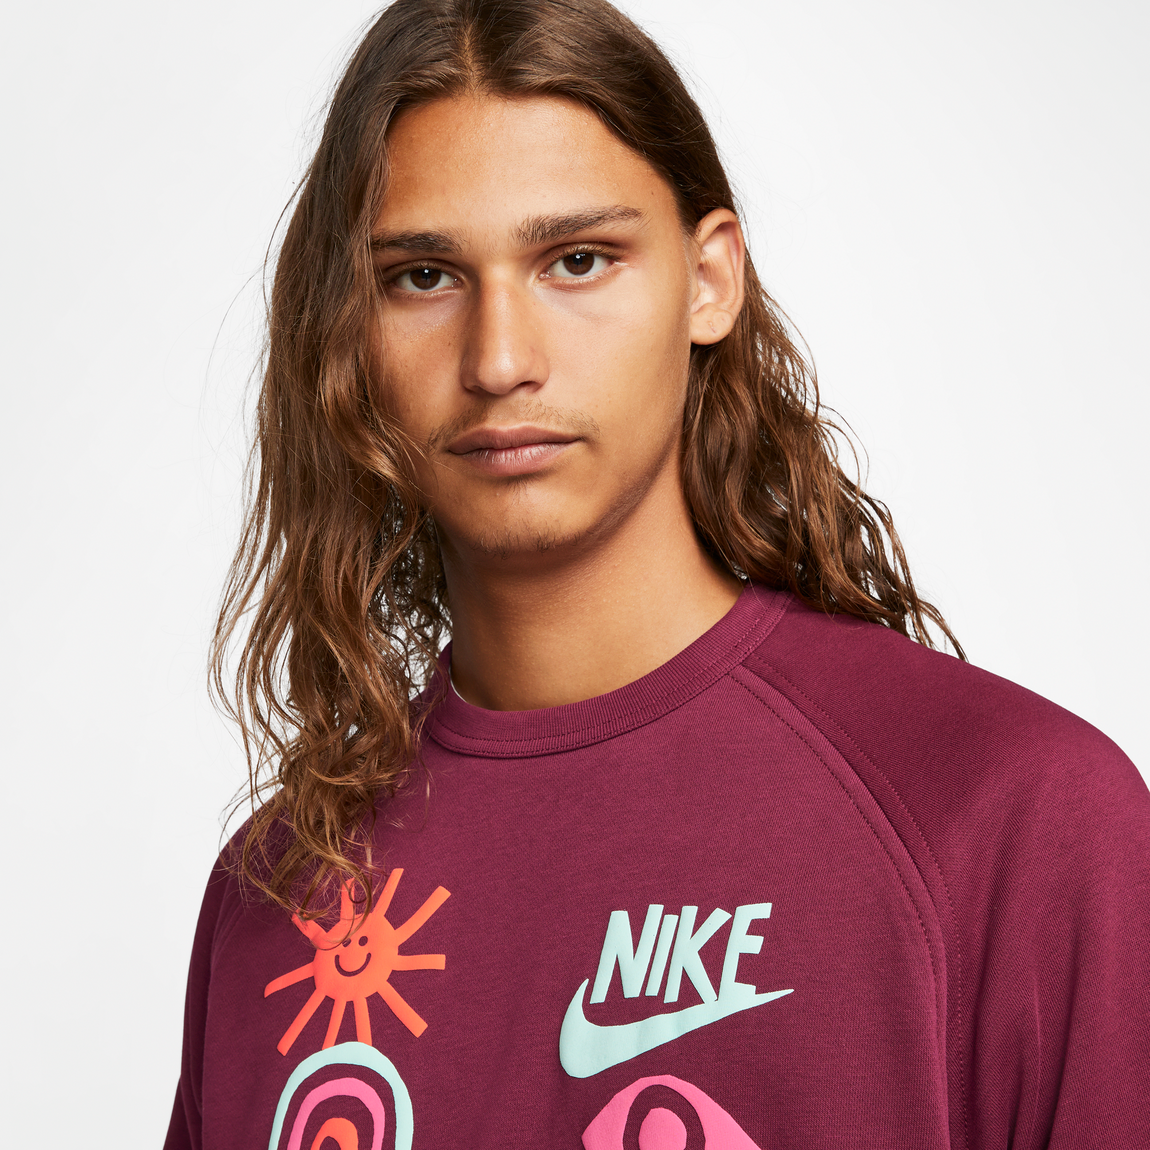 Nike Sportswear Have A Nike Day (Dark Beetroot) – Centre